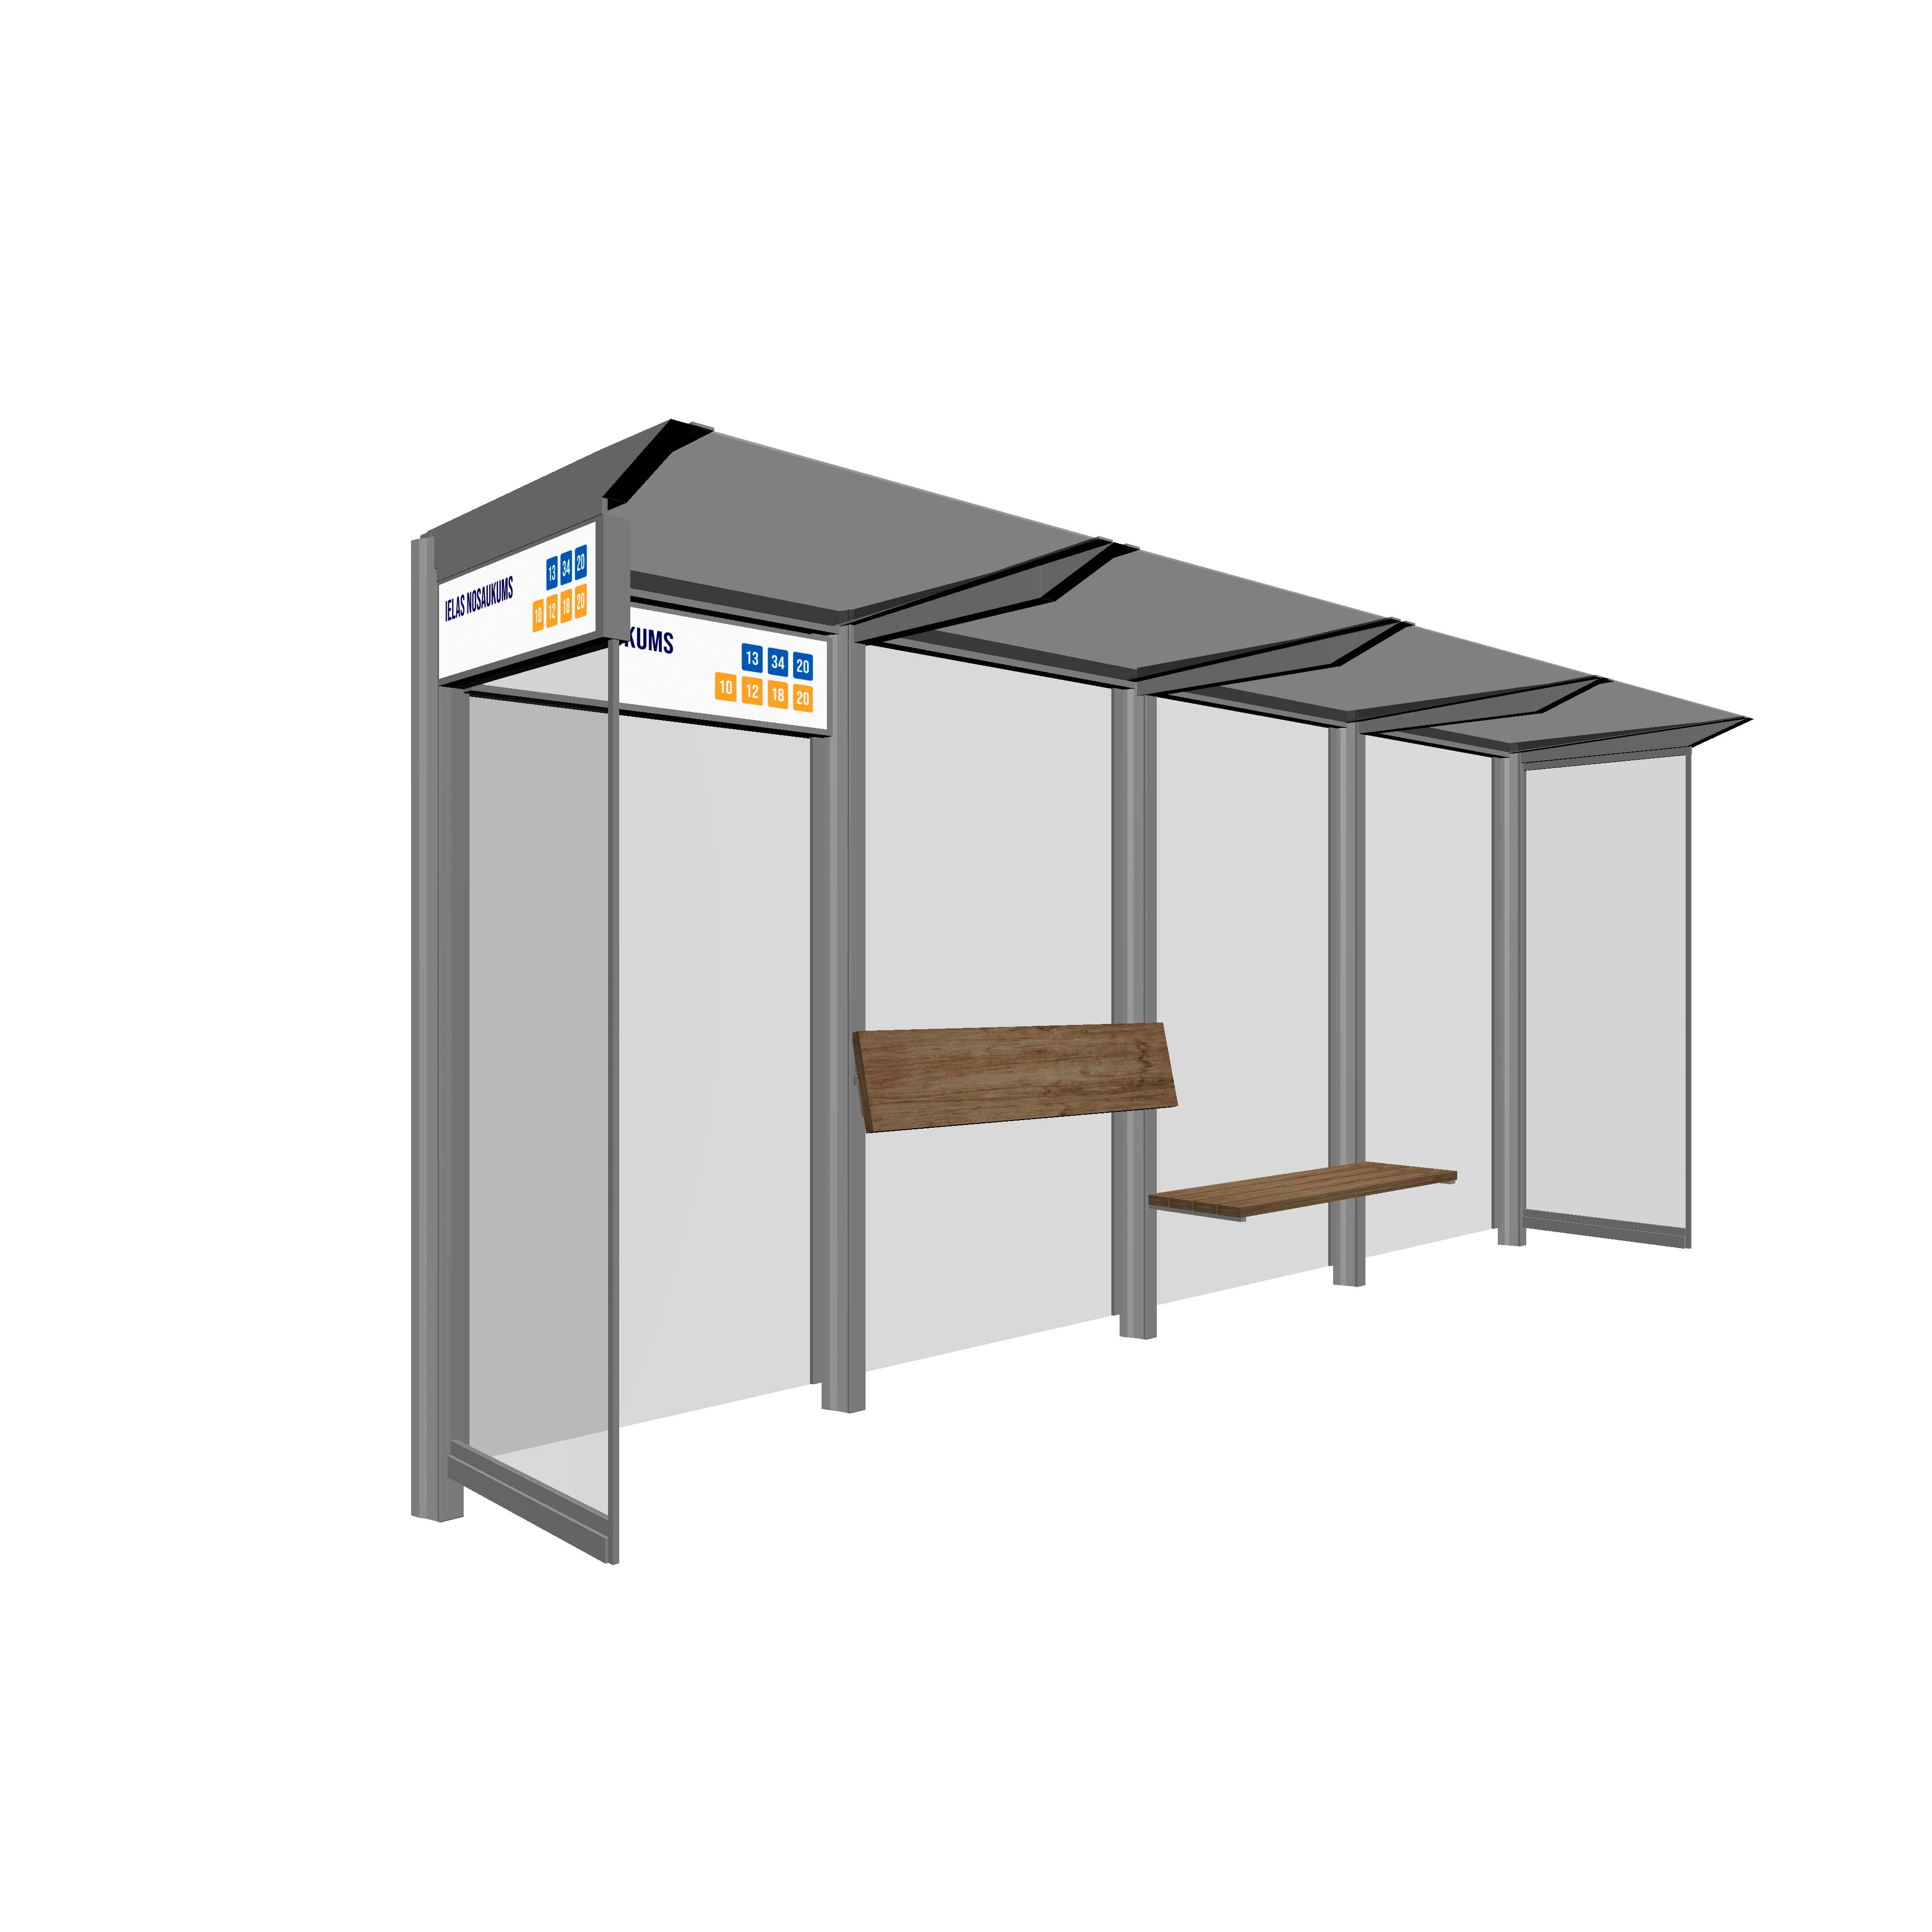 Bus Shelter M-Size by PALAMI Group - Mid-Size Durable Outdoor Advertising Shelter